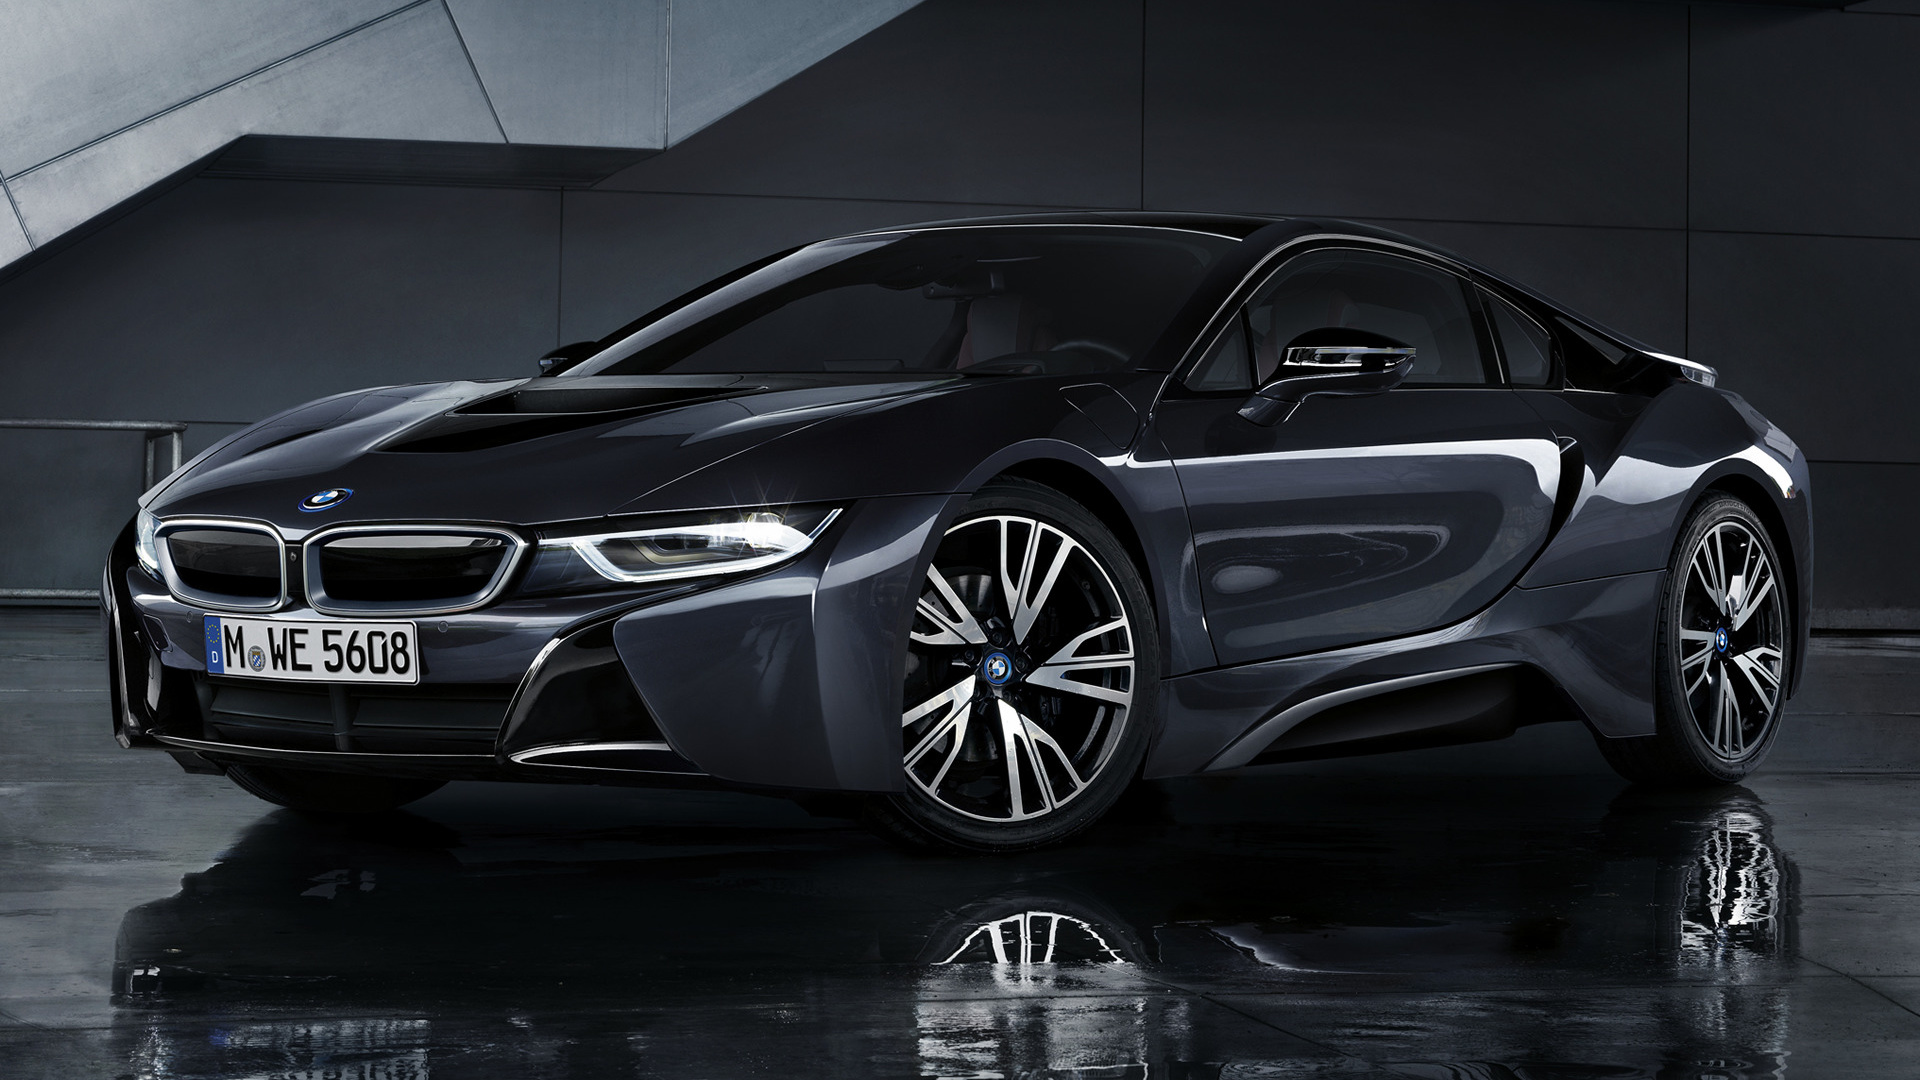 Bmw I8 Protonic Dark Silver Edition iPhone wallpapers